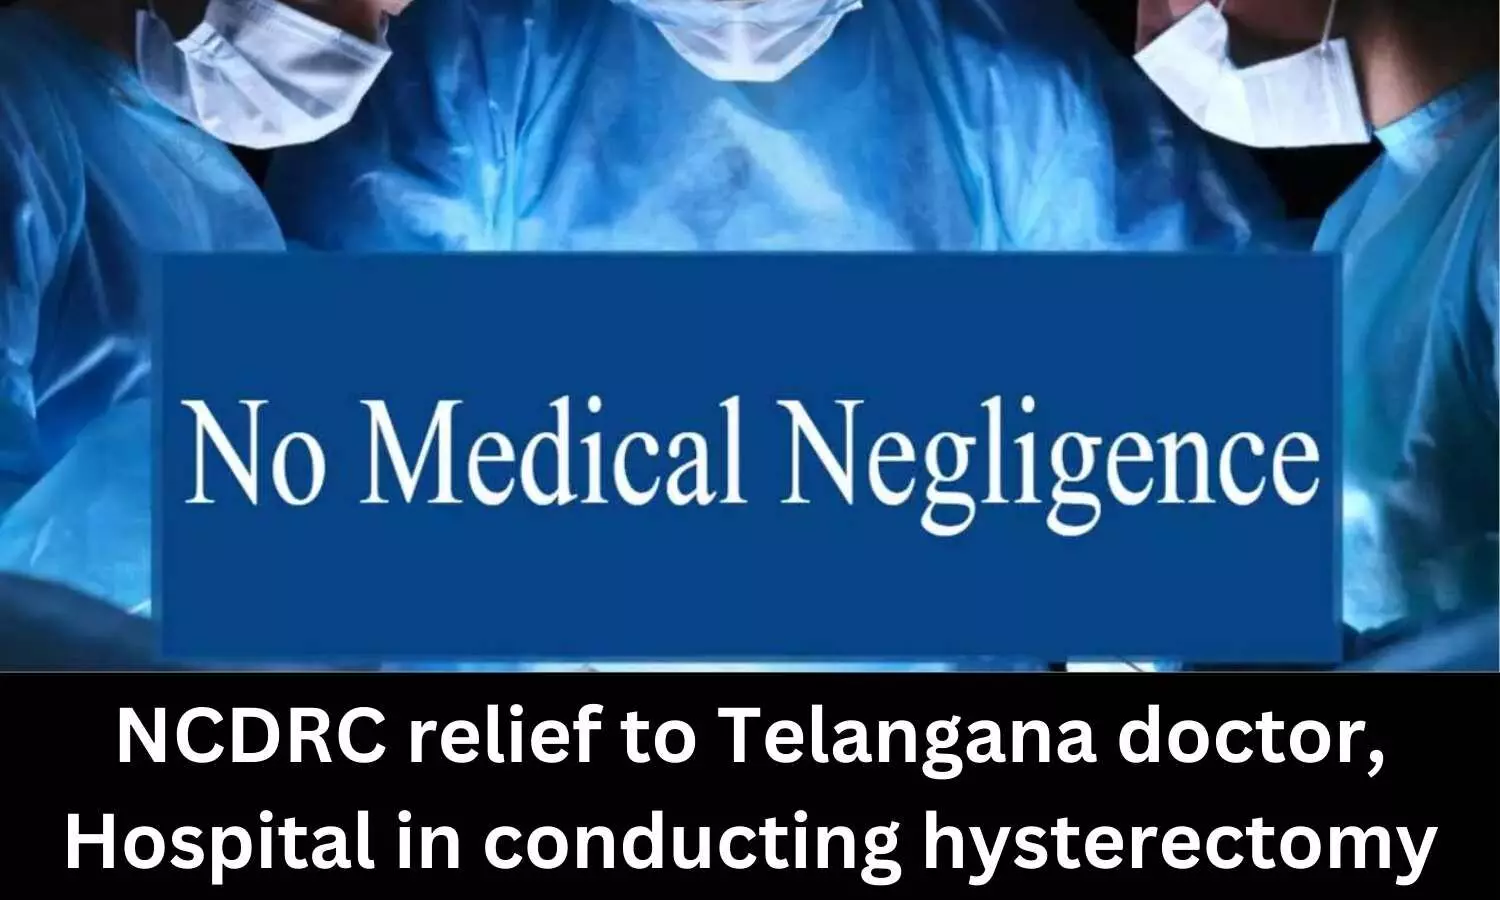 DVT is not always result of negligence: NCDRC relief to Telangana doctor, Hospital in conducting hysterectomy